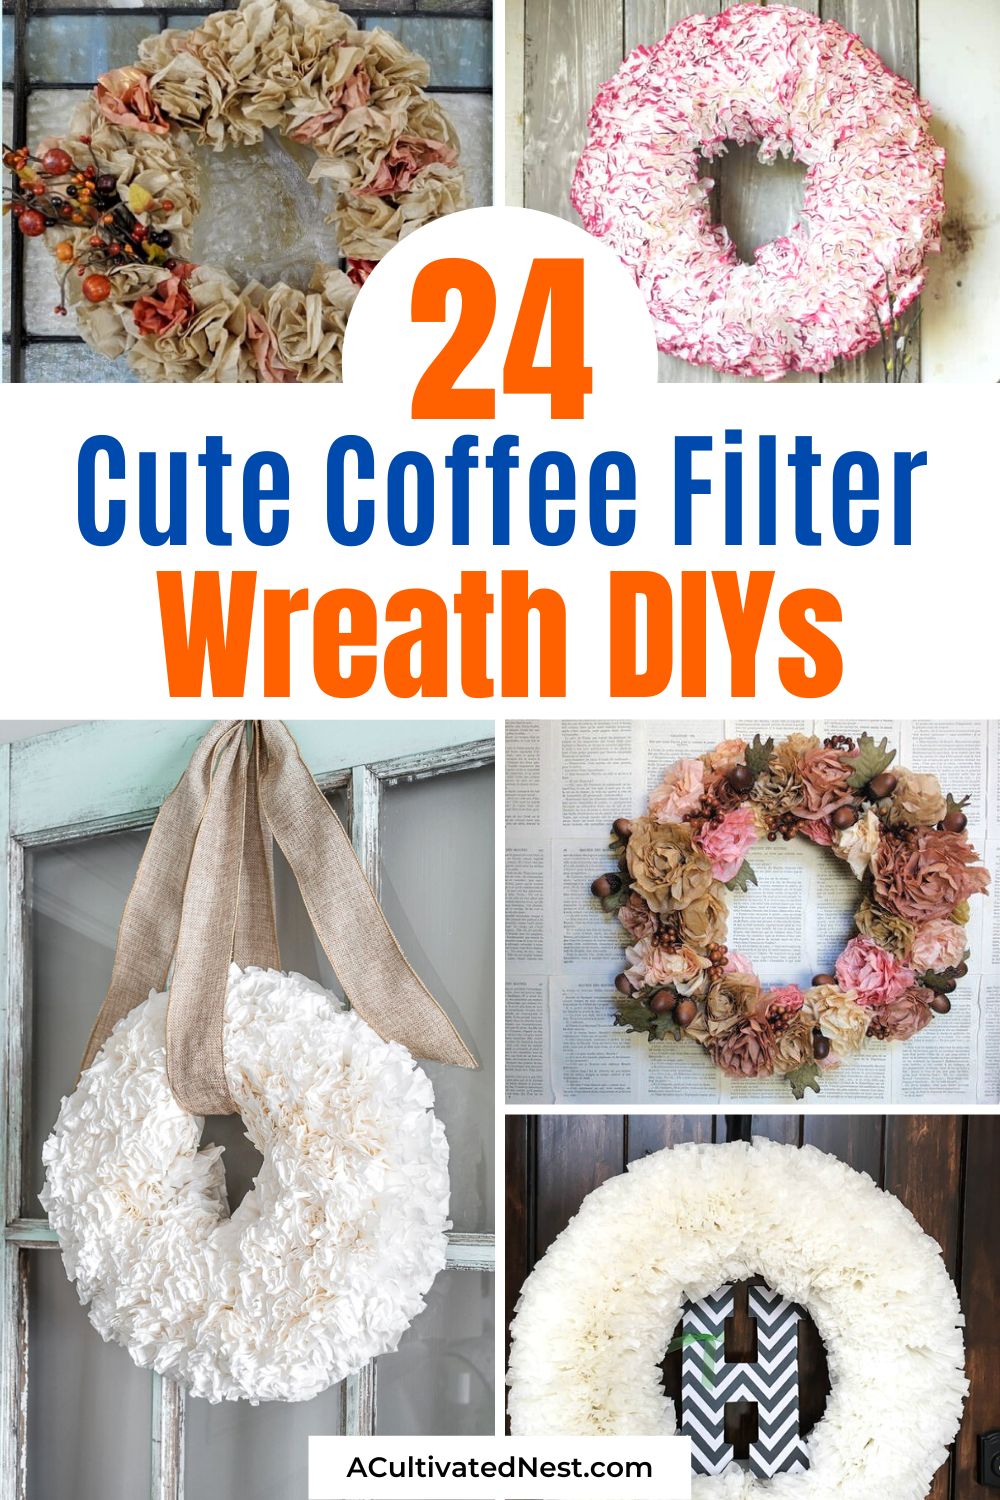 24 Cute Coffee Filter Wreaths- A frugal and fun way to create pretty wreaths for your home is with coffee filters! To inspire you, here are many cute coffee filter wreaths! | #coffeFilterWreaths #diyWreaths #diyProjects #crafts #ACultivatedNest